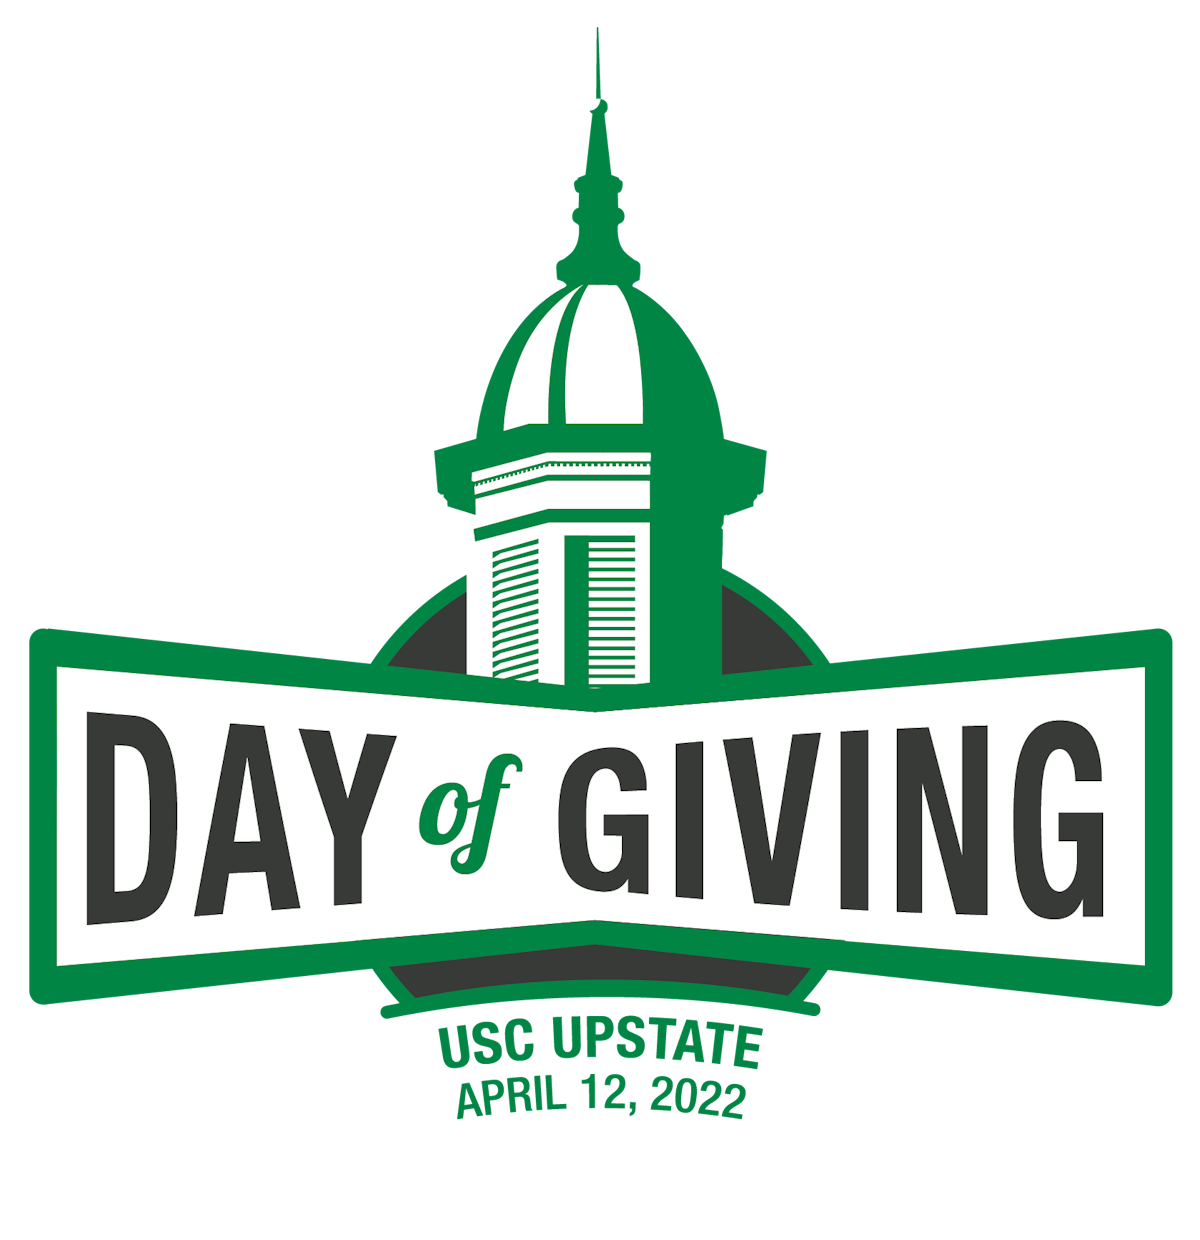 USC Upstate Day of Giving